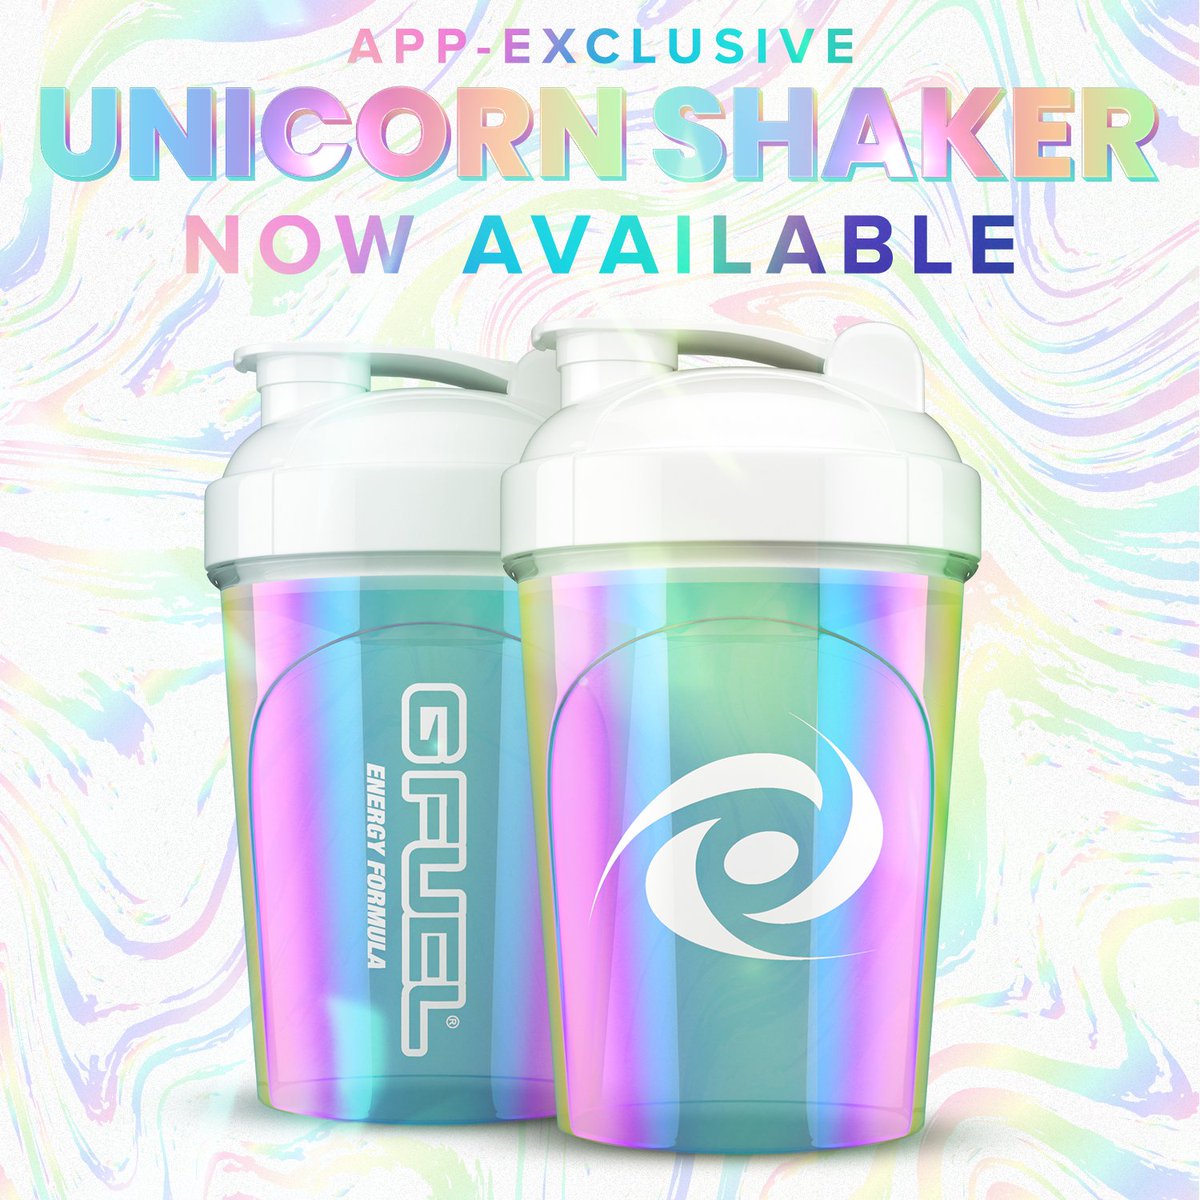 💜  𝗥𝗧 + 𝗖𝗢𝗠𝗠𝗘𝗡𝗧 '🦄  ' to win a #GFUEL APP EXCLUSIVE 'UNICORN' STARTER KIT!!!

🤩  Picking 2 winners on Monday to celebrate the launch of these MAGNIFICENT BEAUTIES & #NationalUnicornDay!!!

📲 🛍️ 𝗗𝗼𝘄𝗻𝗹𝗼𝗮𝗱 𝗔𝗽𝗽 & 𝗚𝗲𝘁 𝗦𝗵𝗮𝗸𝗲𝗿: GFUEL.ly/unicorn-shaker…